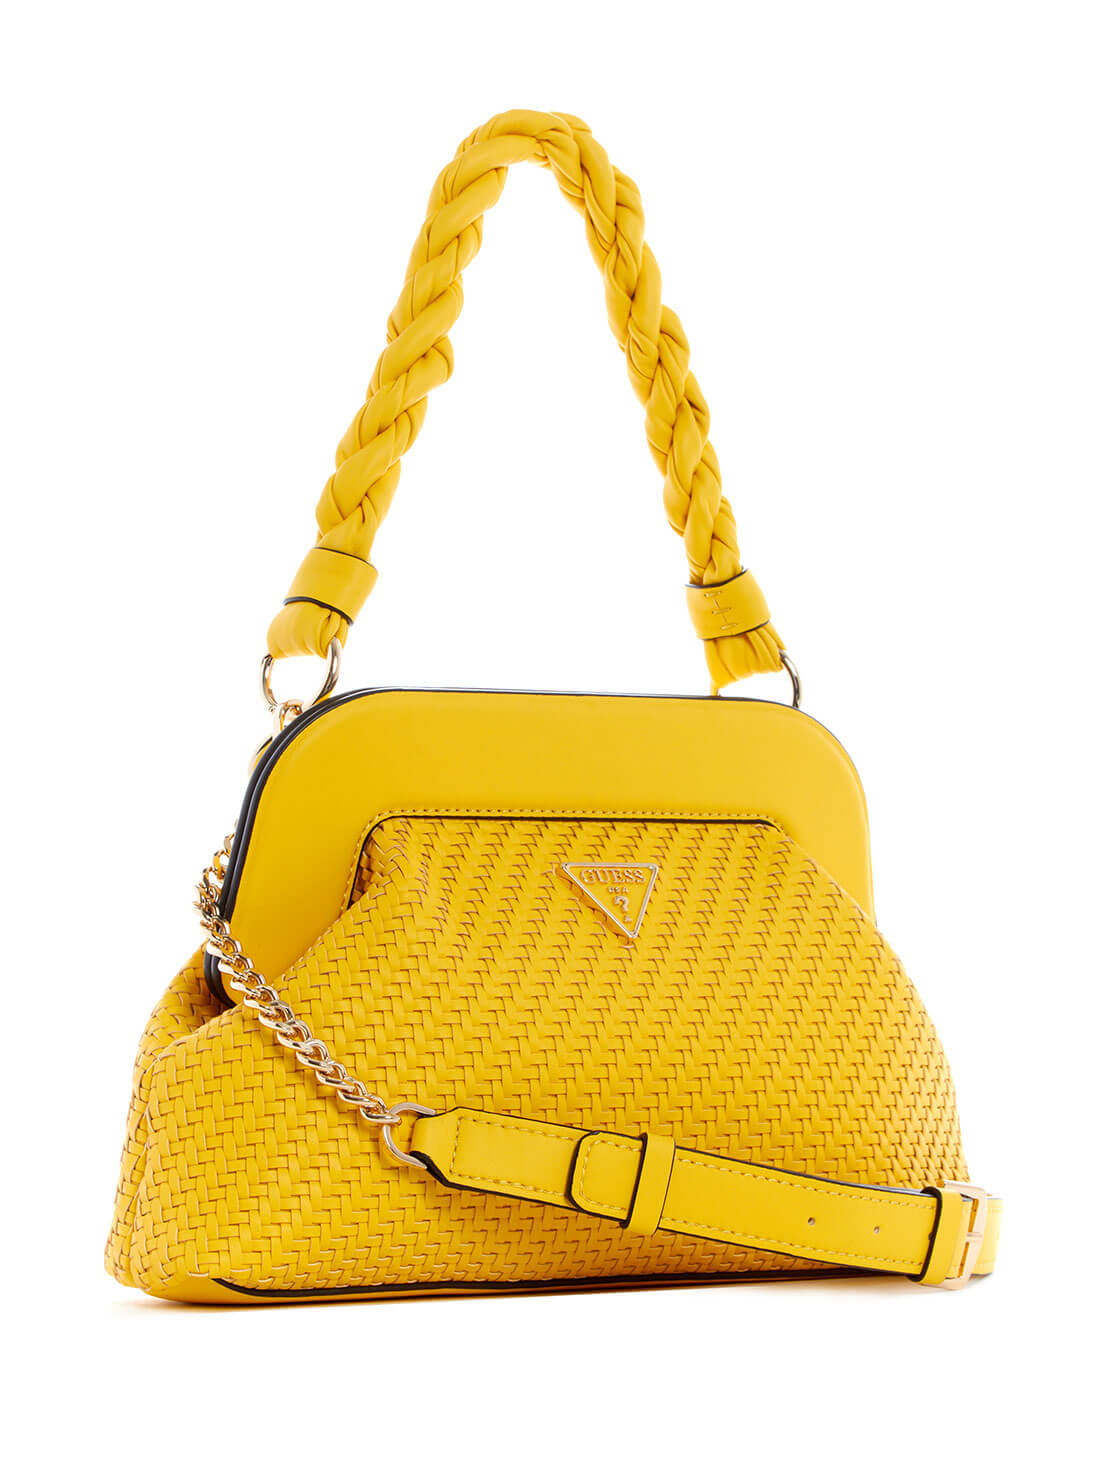 GUESS Womens Lemon Yellow Woven Hassie Frame Crossbody Bag VG839717 Side View